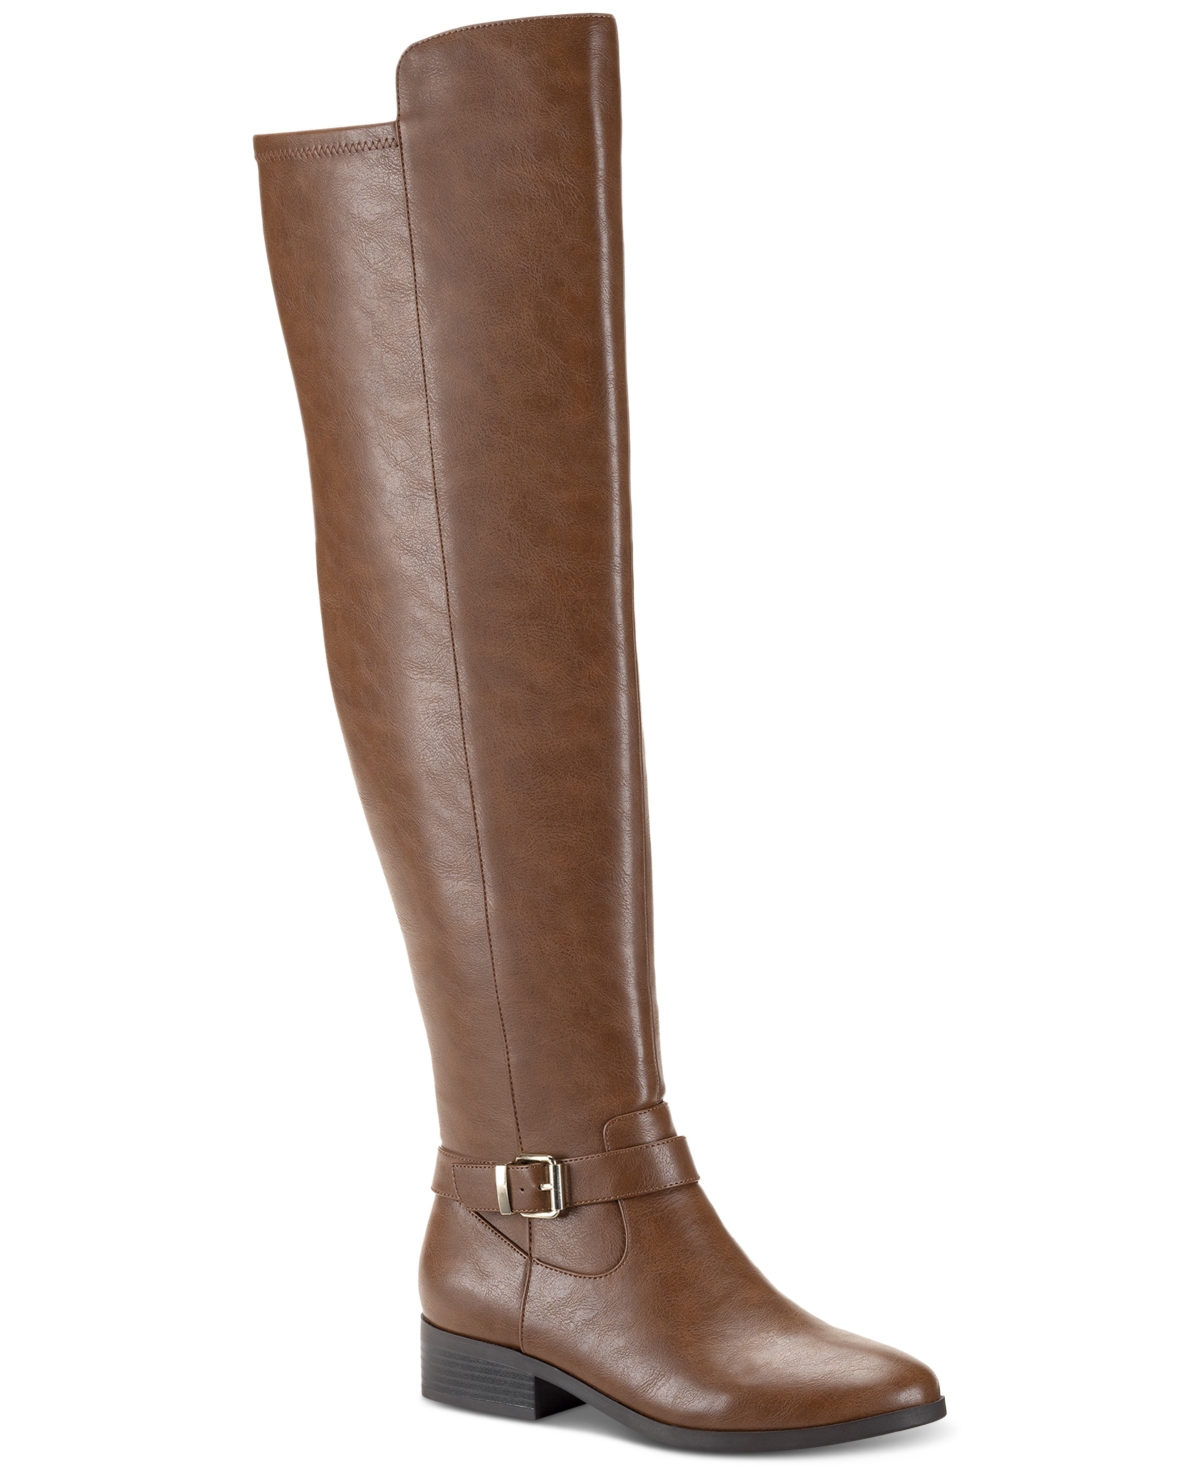 Women's Charlaa Buckled Over-The-Knee Wide-Calf Boots, Created for Macy's - Cognac Smooth